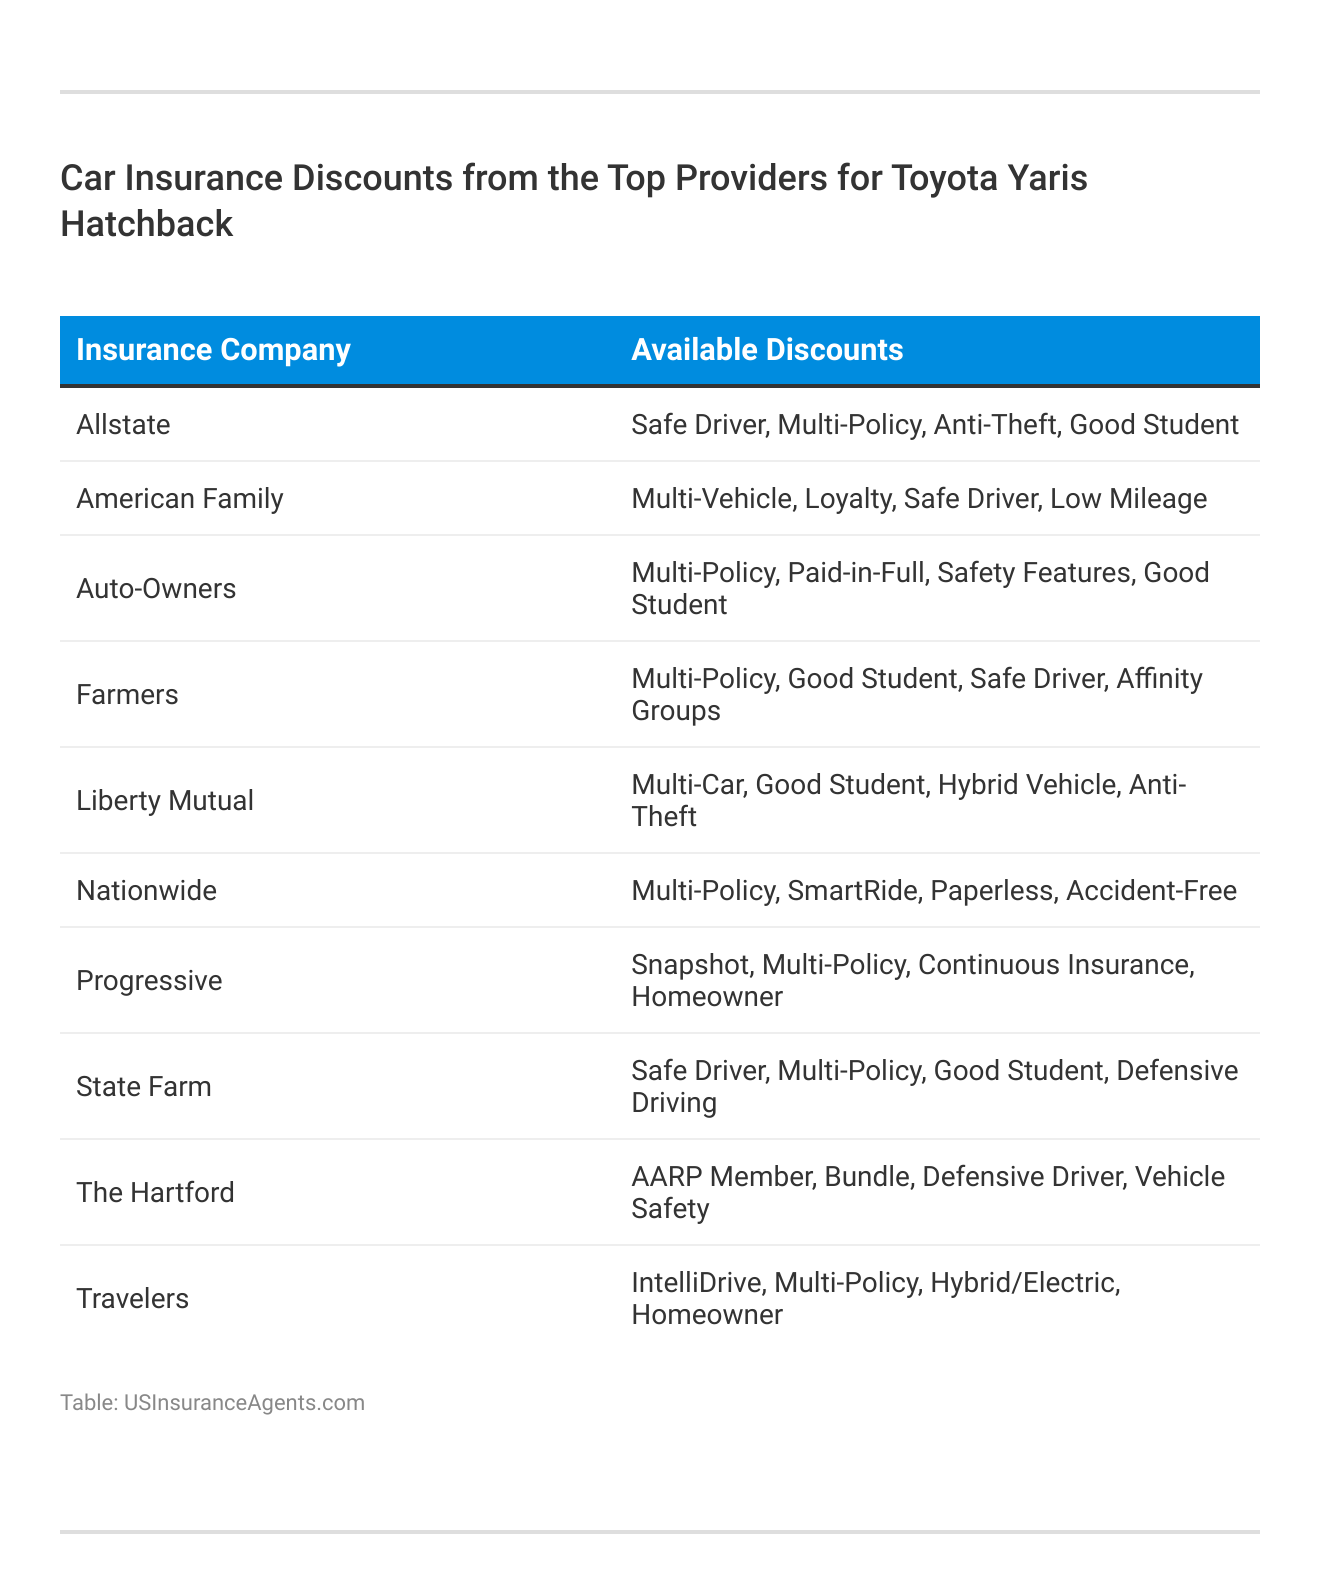 <h3>Car Insurance Discounts from the Top Providers for Toyota Yaris Hatchback</h3>